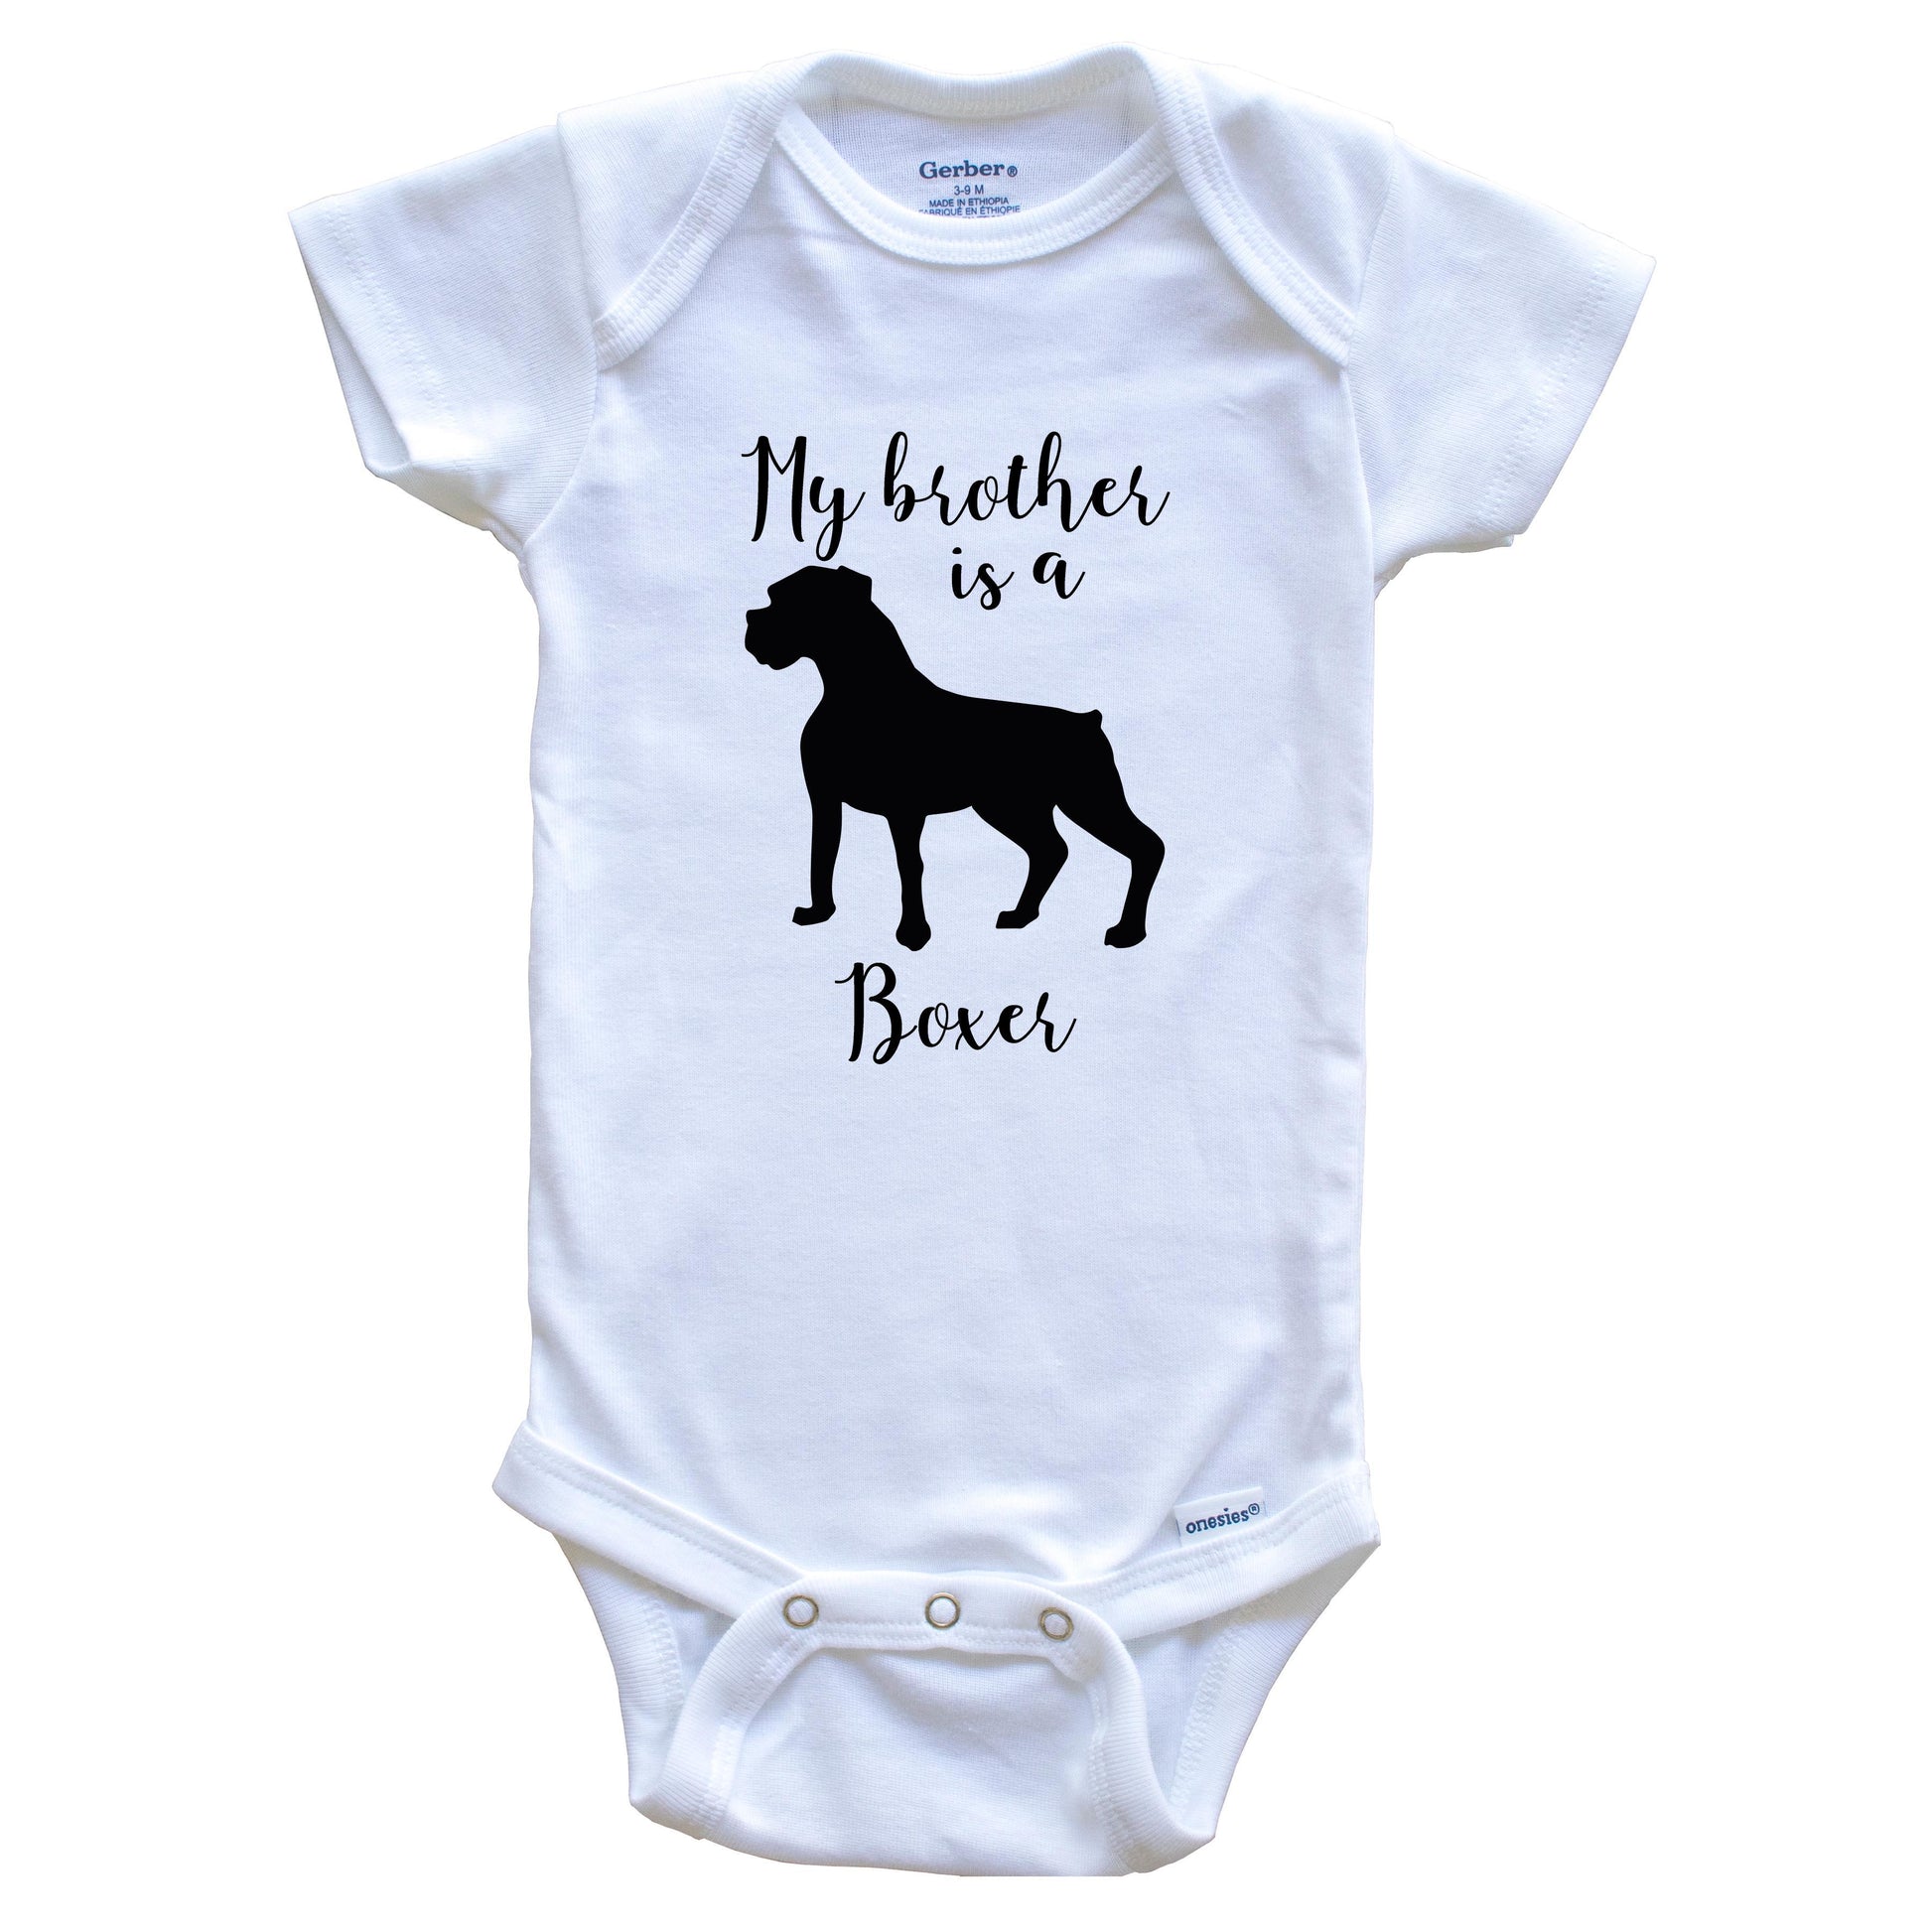 My Brother Is A Boxer Cute Dog Baby Onesie - Boxer One Piece Baby Bodysuit